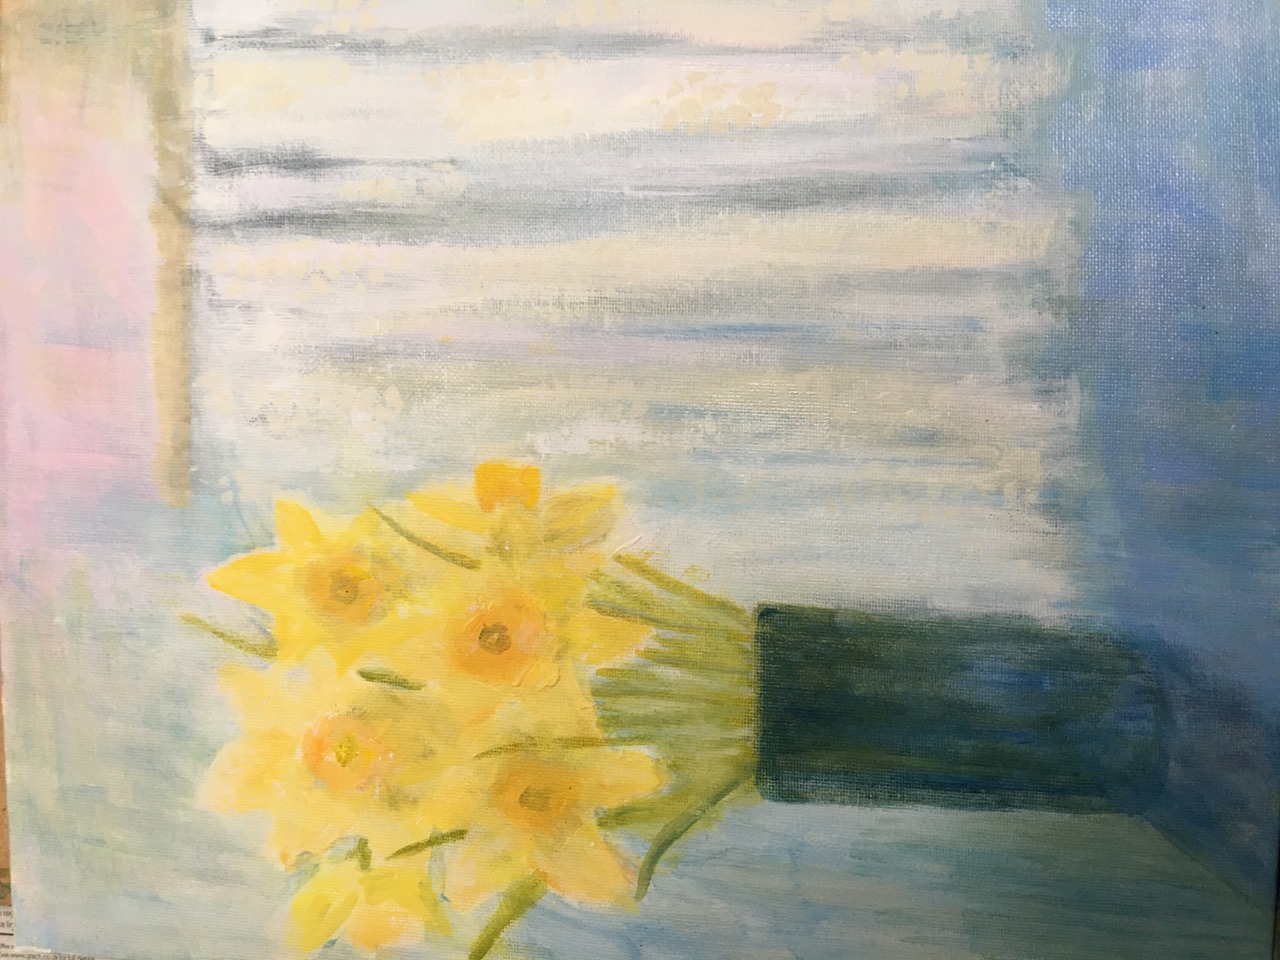 Daffodils by the window